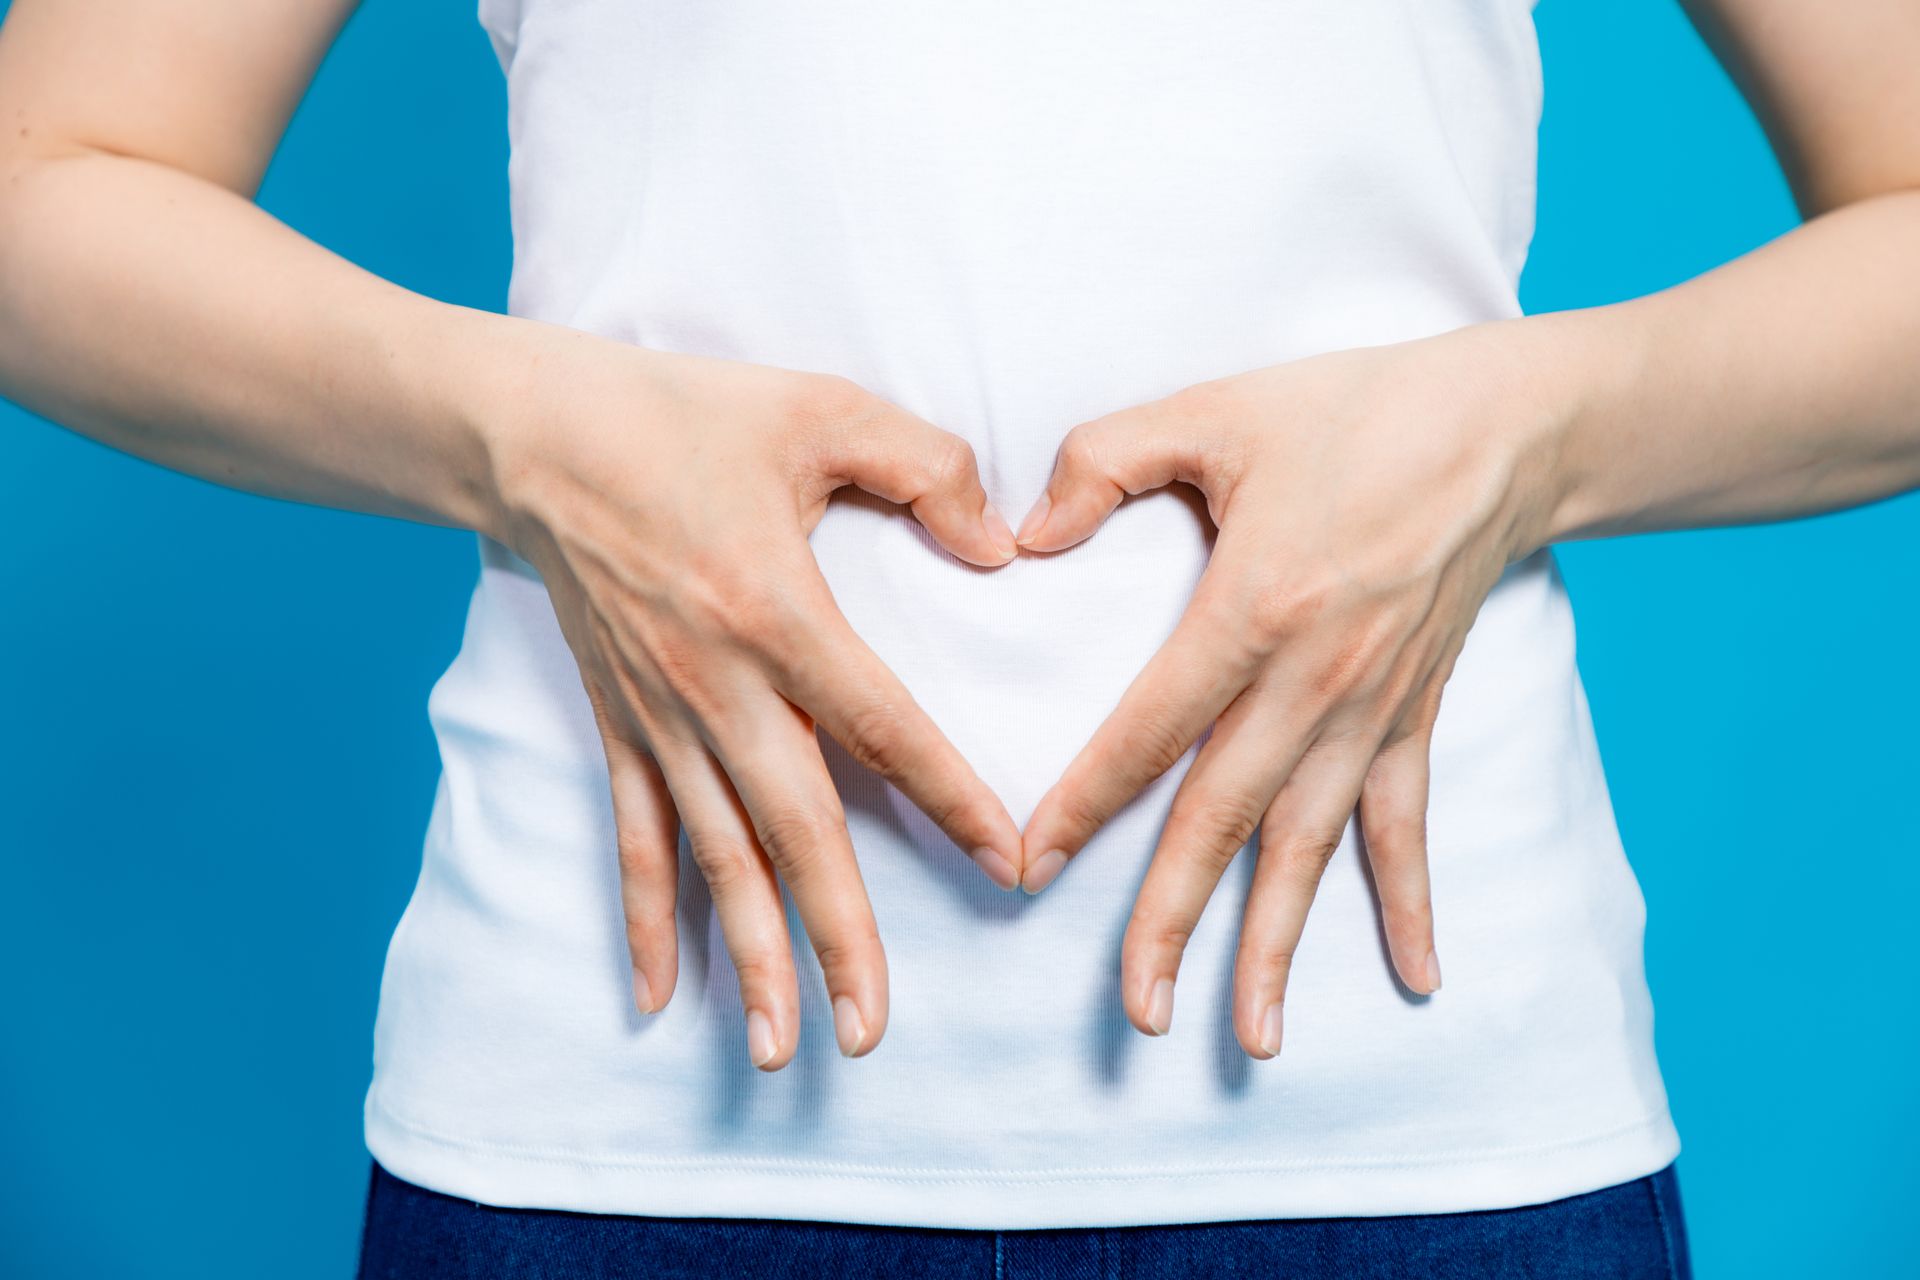 Woman using finger to symbolize the heart shape over her stomach